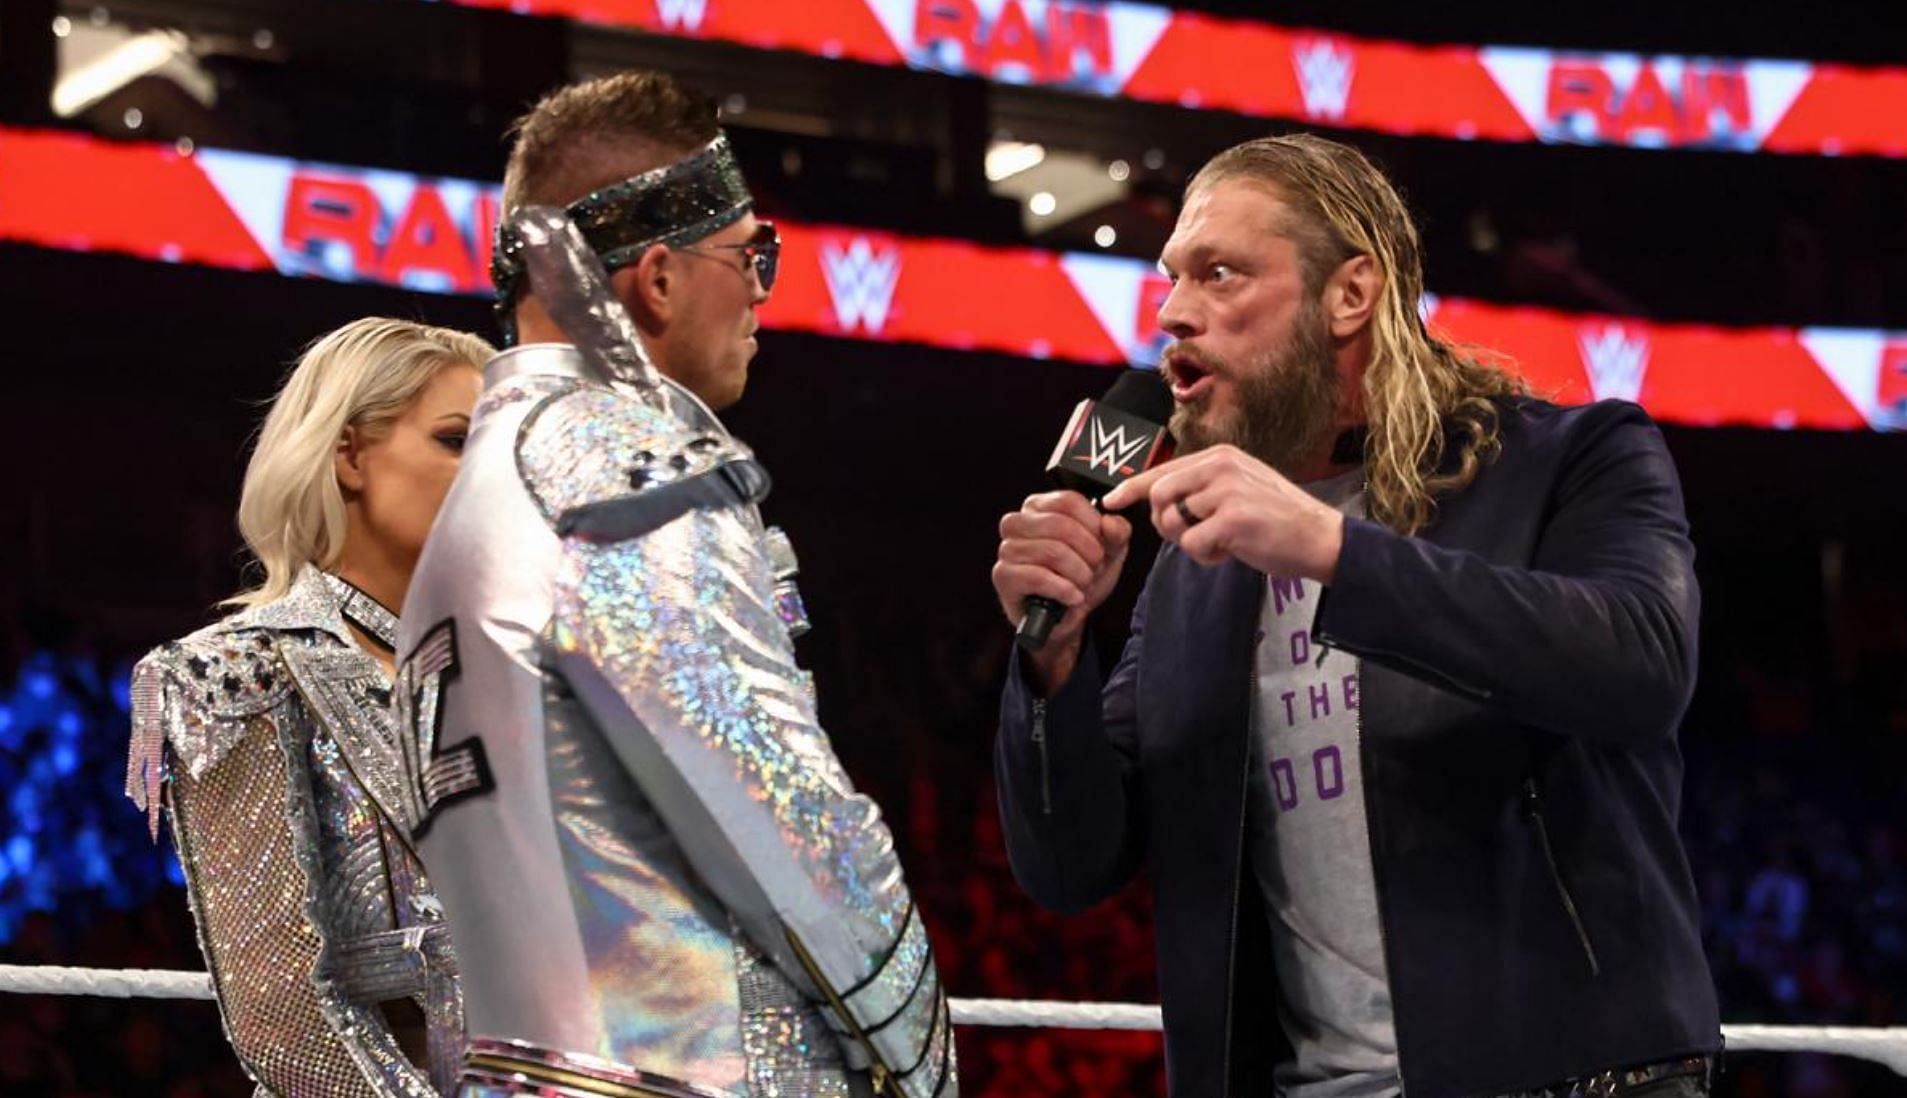 Edge and the Miz had a heated war of words this week on RAW